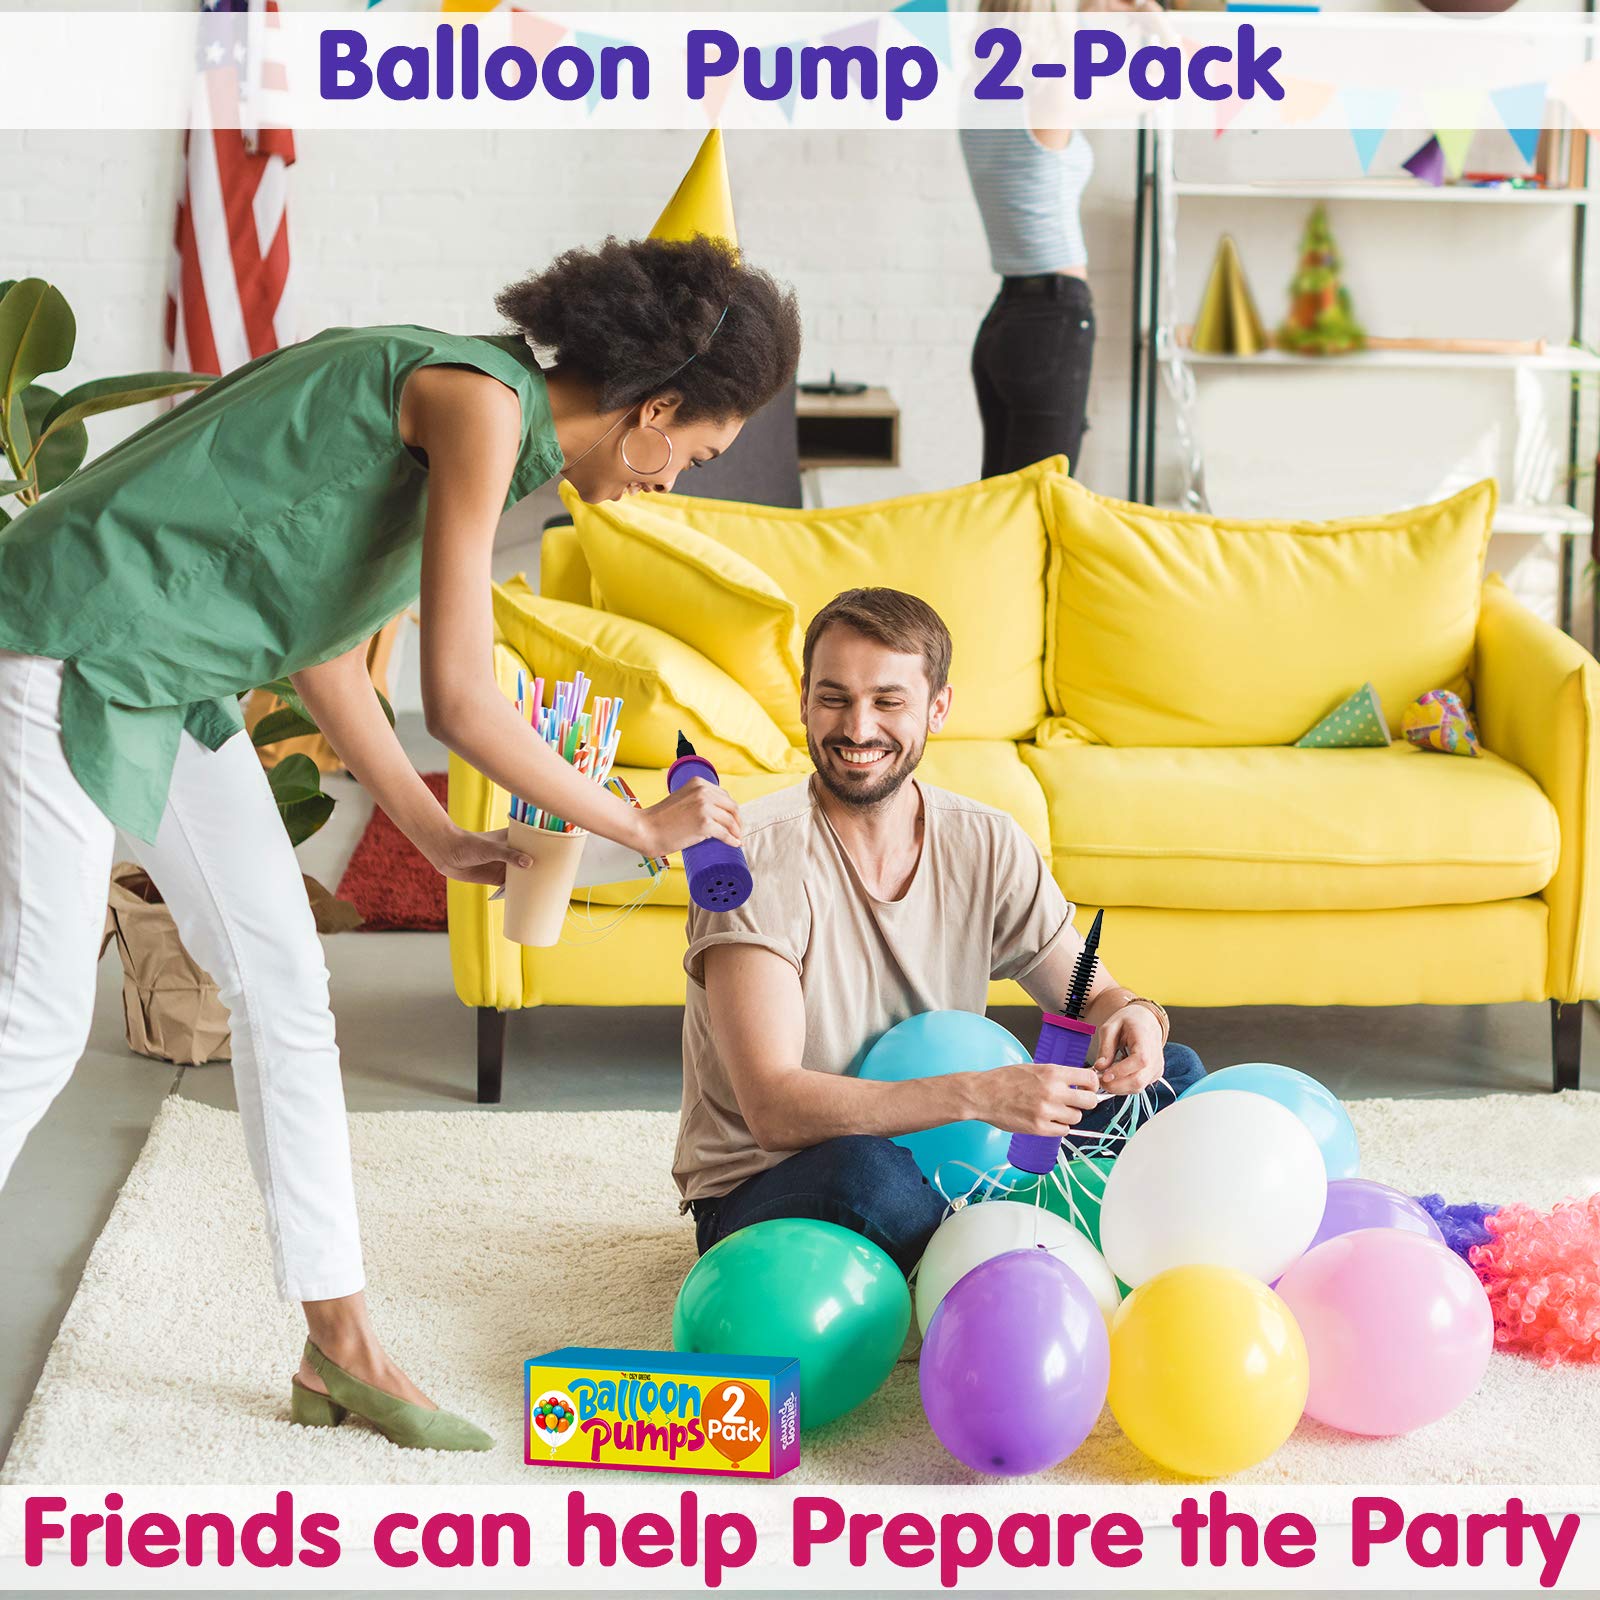 Balloon Pump Hand Held, Inflator Air Pump for Balloons - 2Way Dual Action, 2Pack: Friends can Help - Easy to Use, 100% Lifetime Satisfaction Guarantee - Sturdy Ballon Inflator Pump